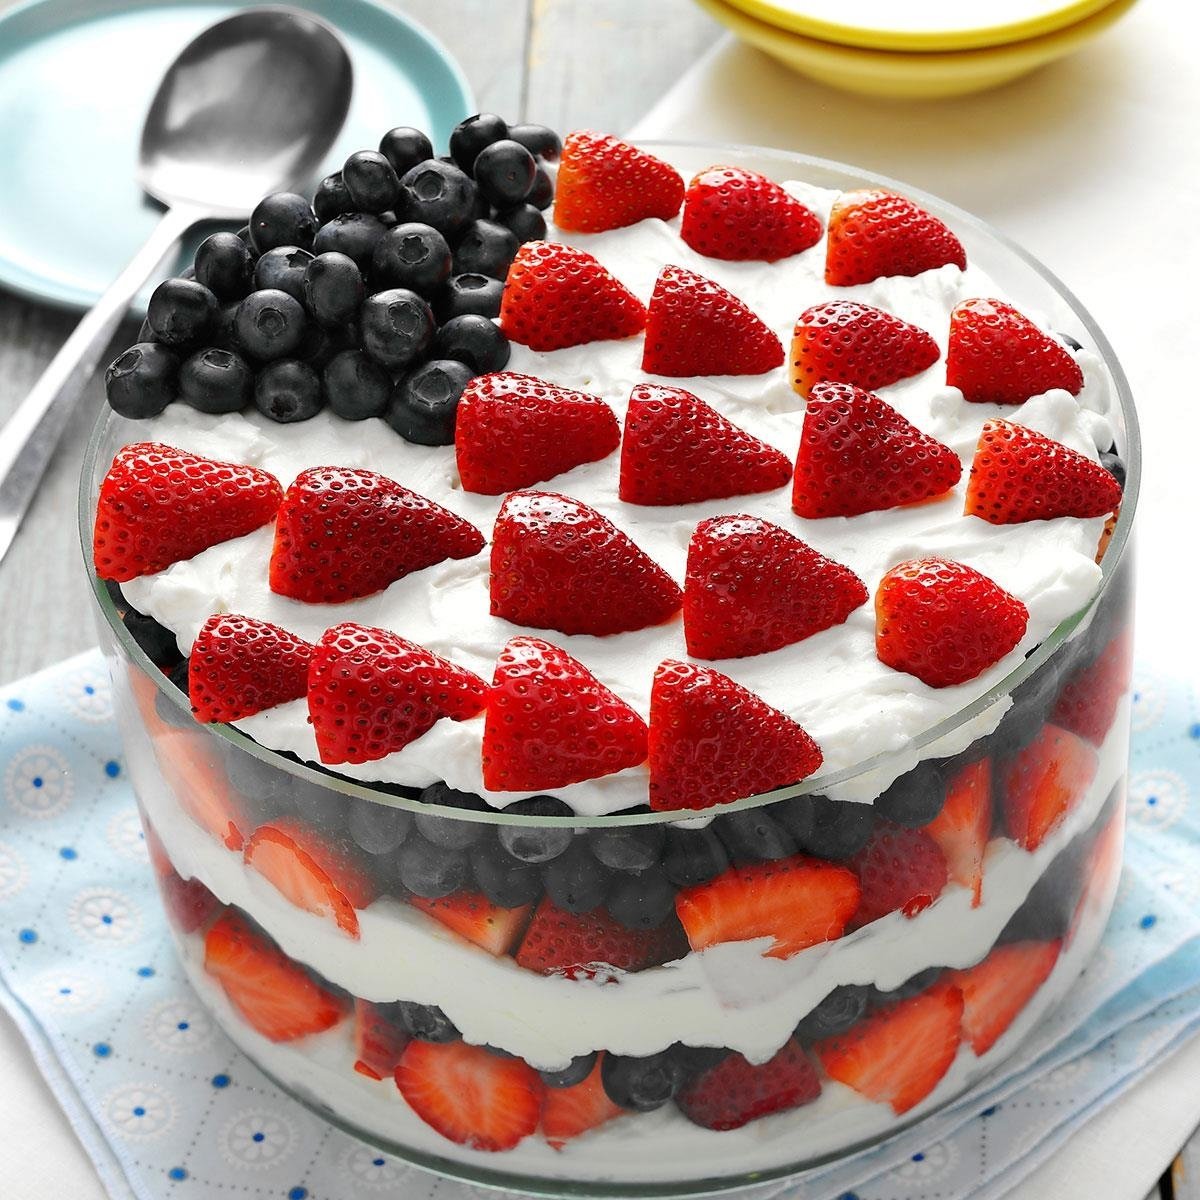 10 Spectacular 4Th Of July Dessert Ideas red white and blue dessert recipe taste of home 1 2022